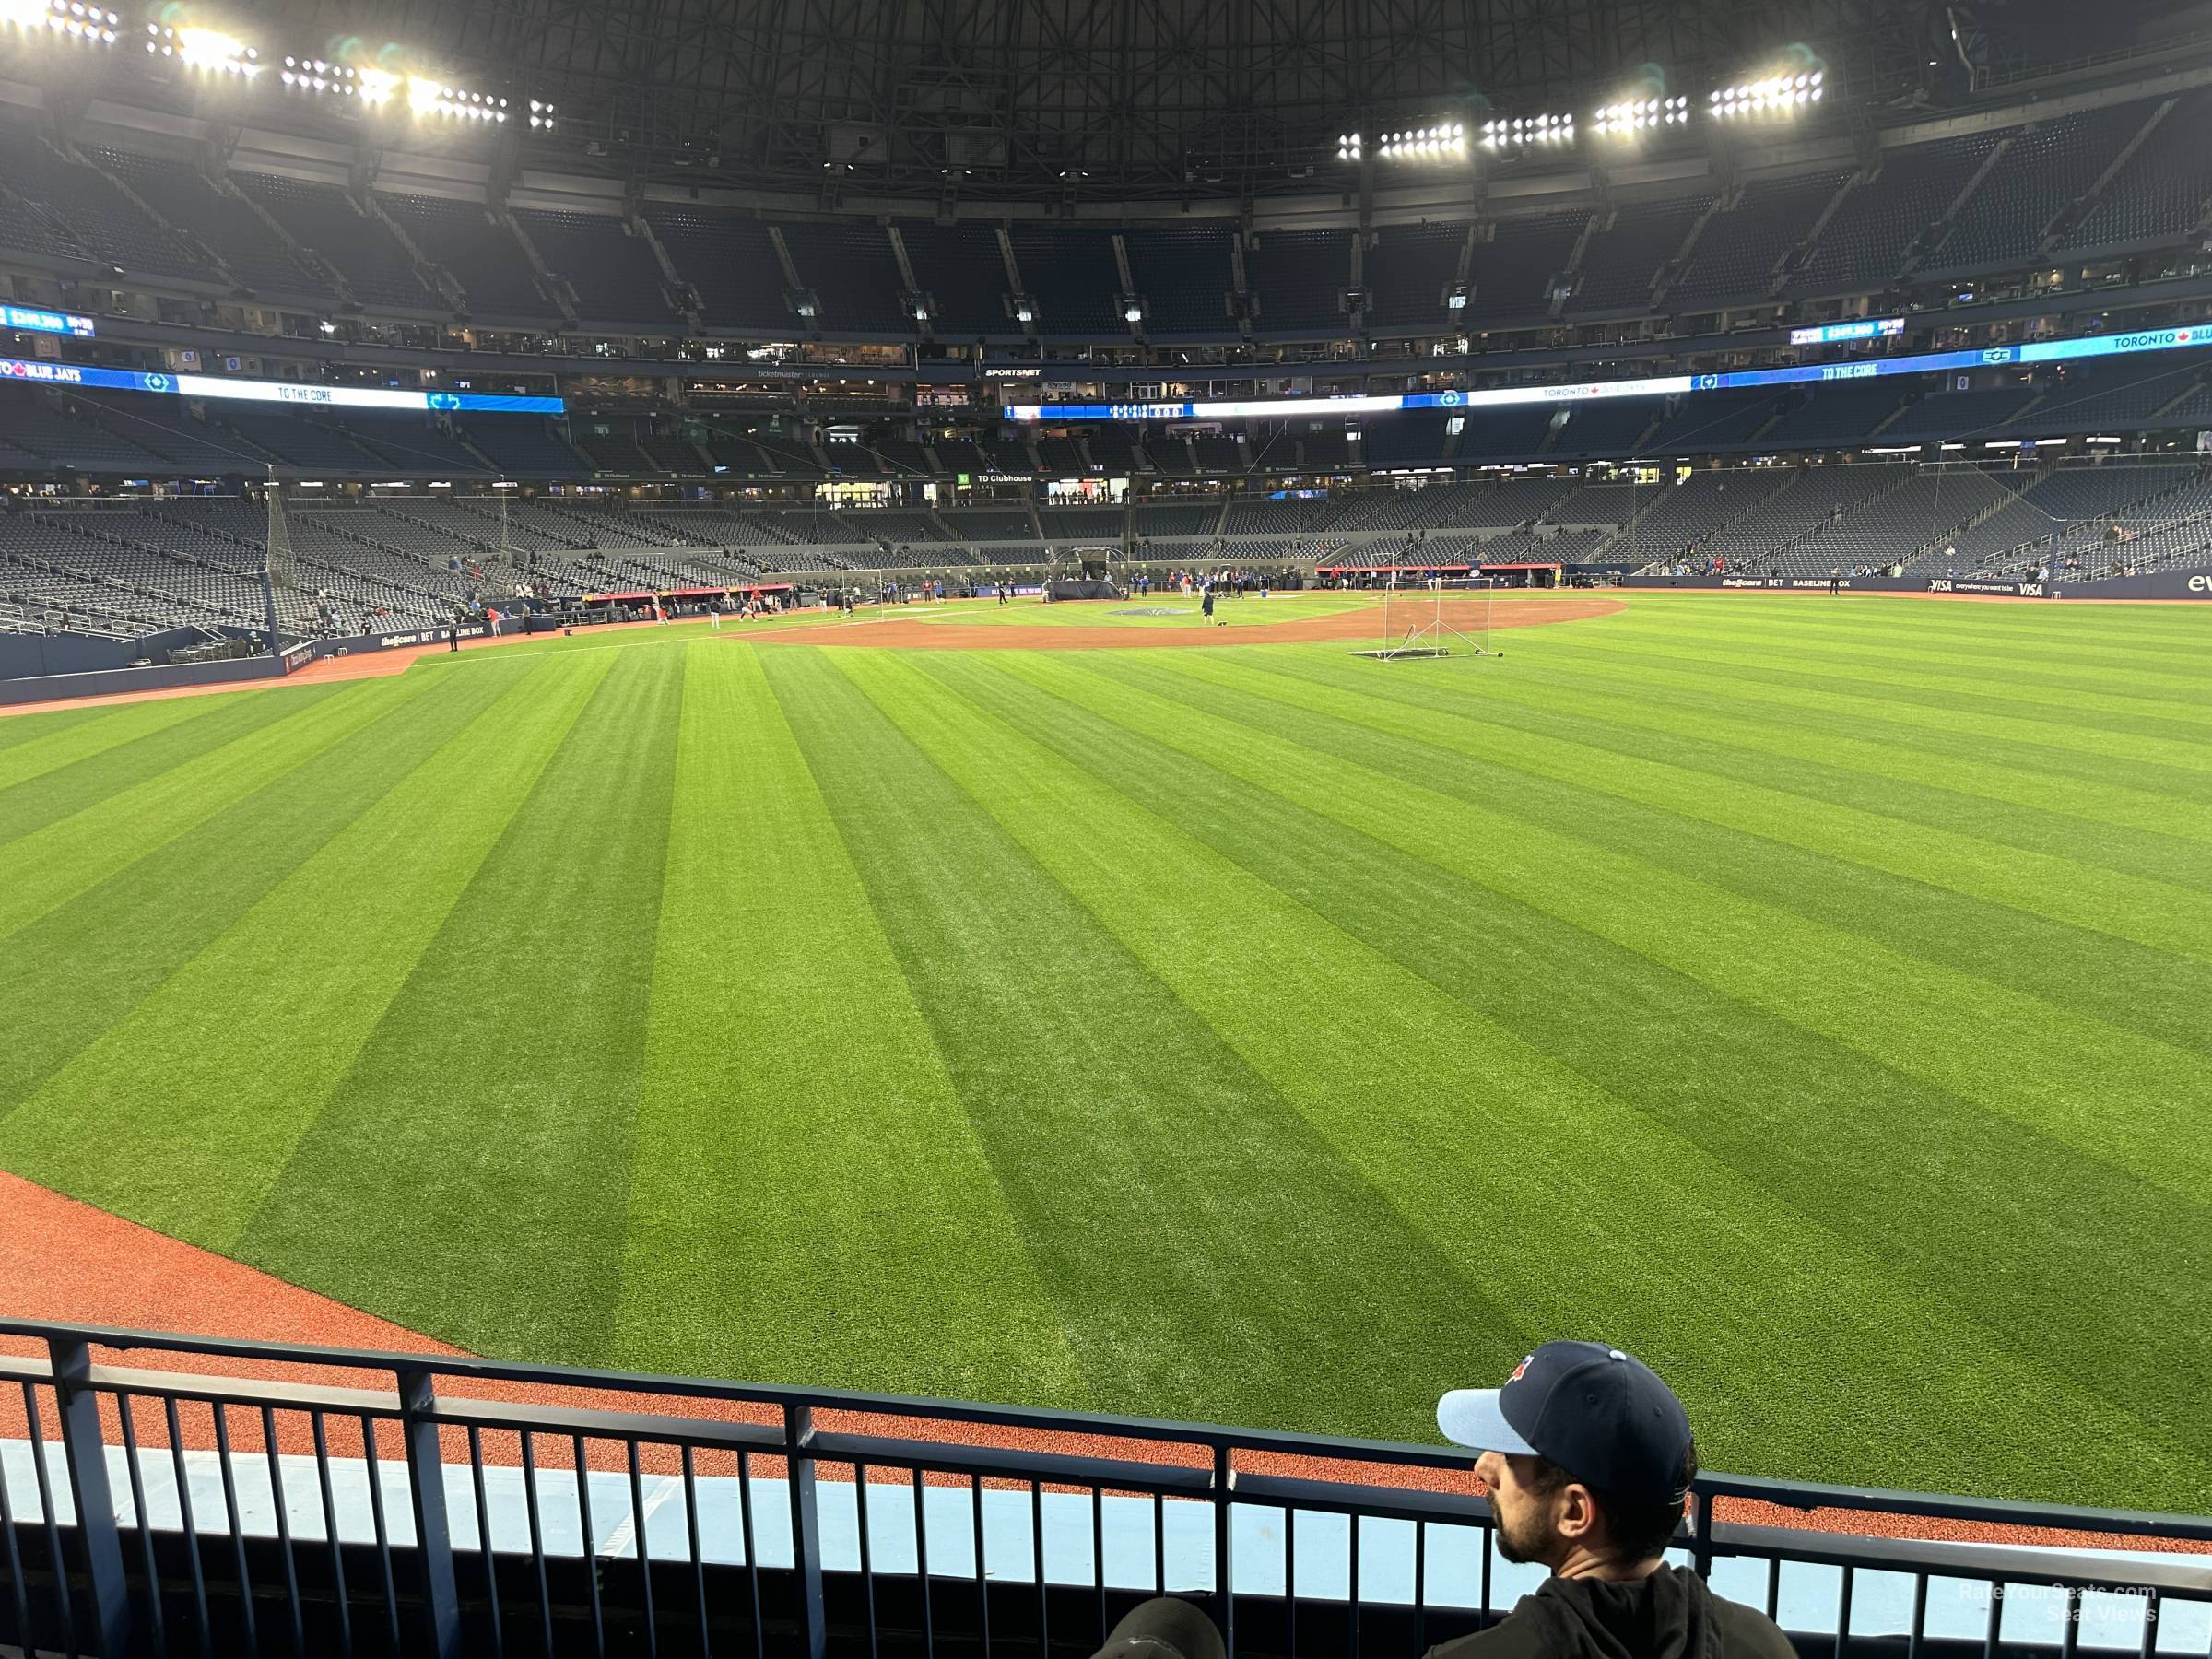 section 102a, row 3 seat view  for baseball - rogers centre